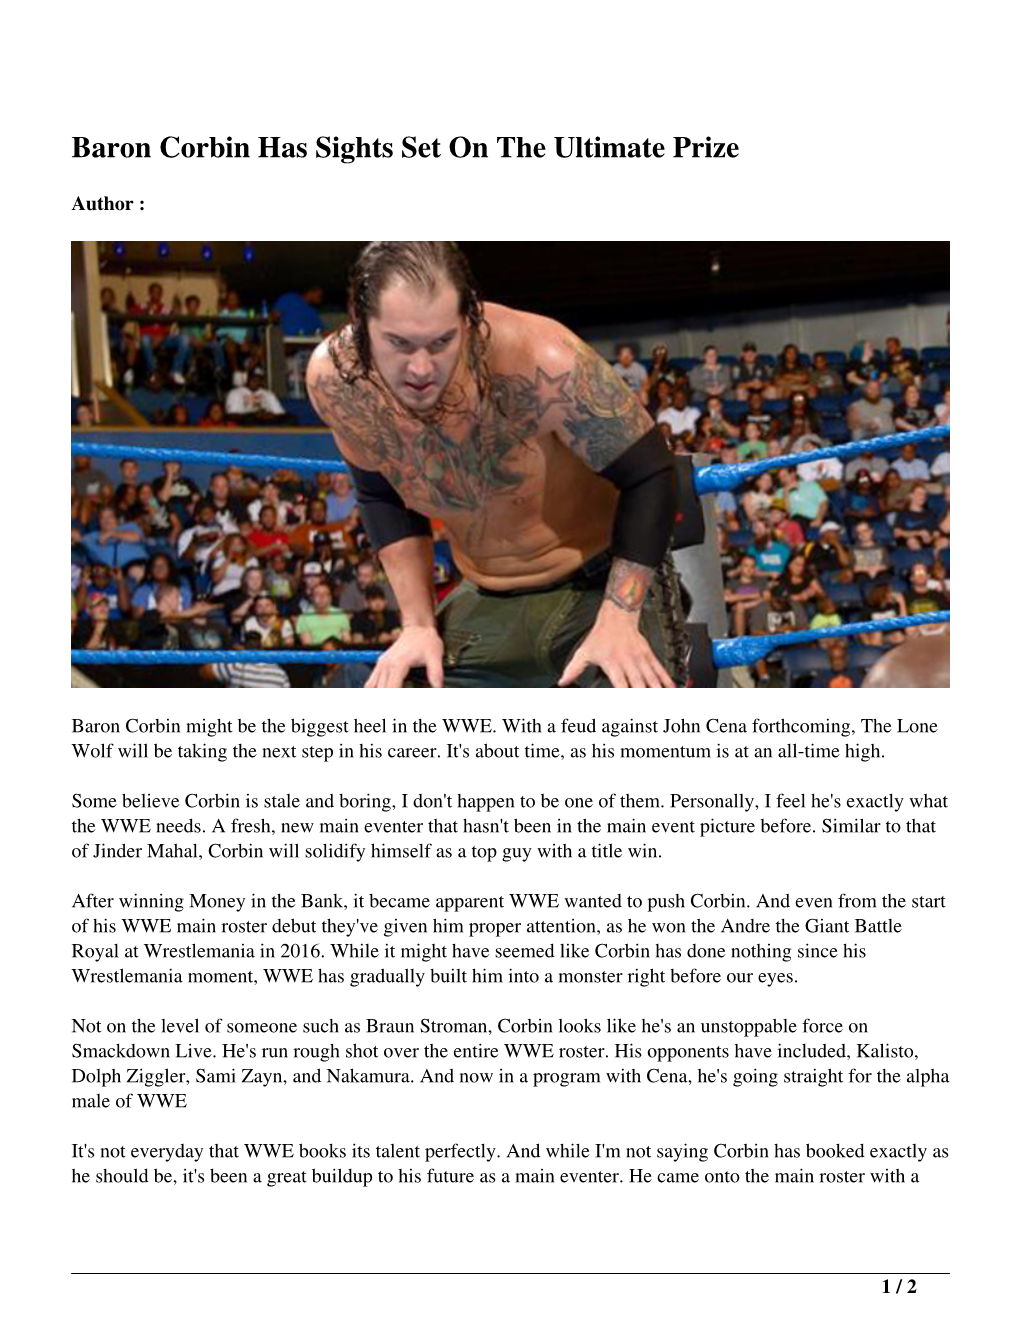 Baron Corbin Has Sights Set on the Ultimate Prize